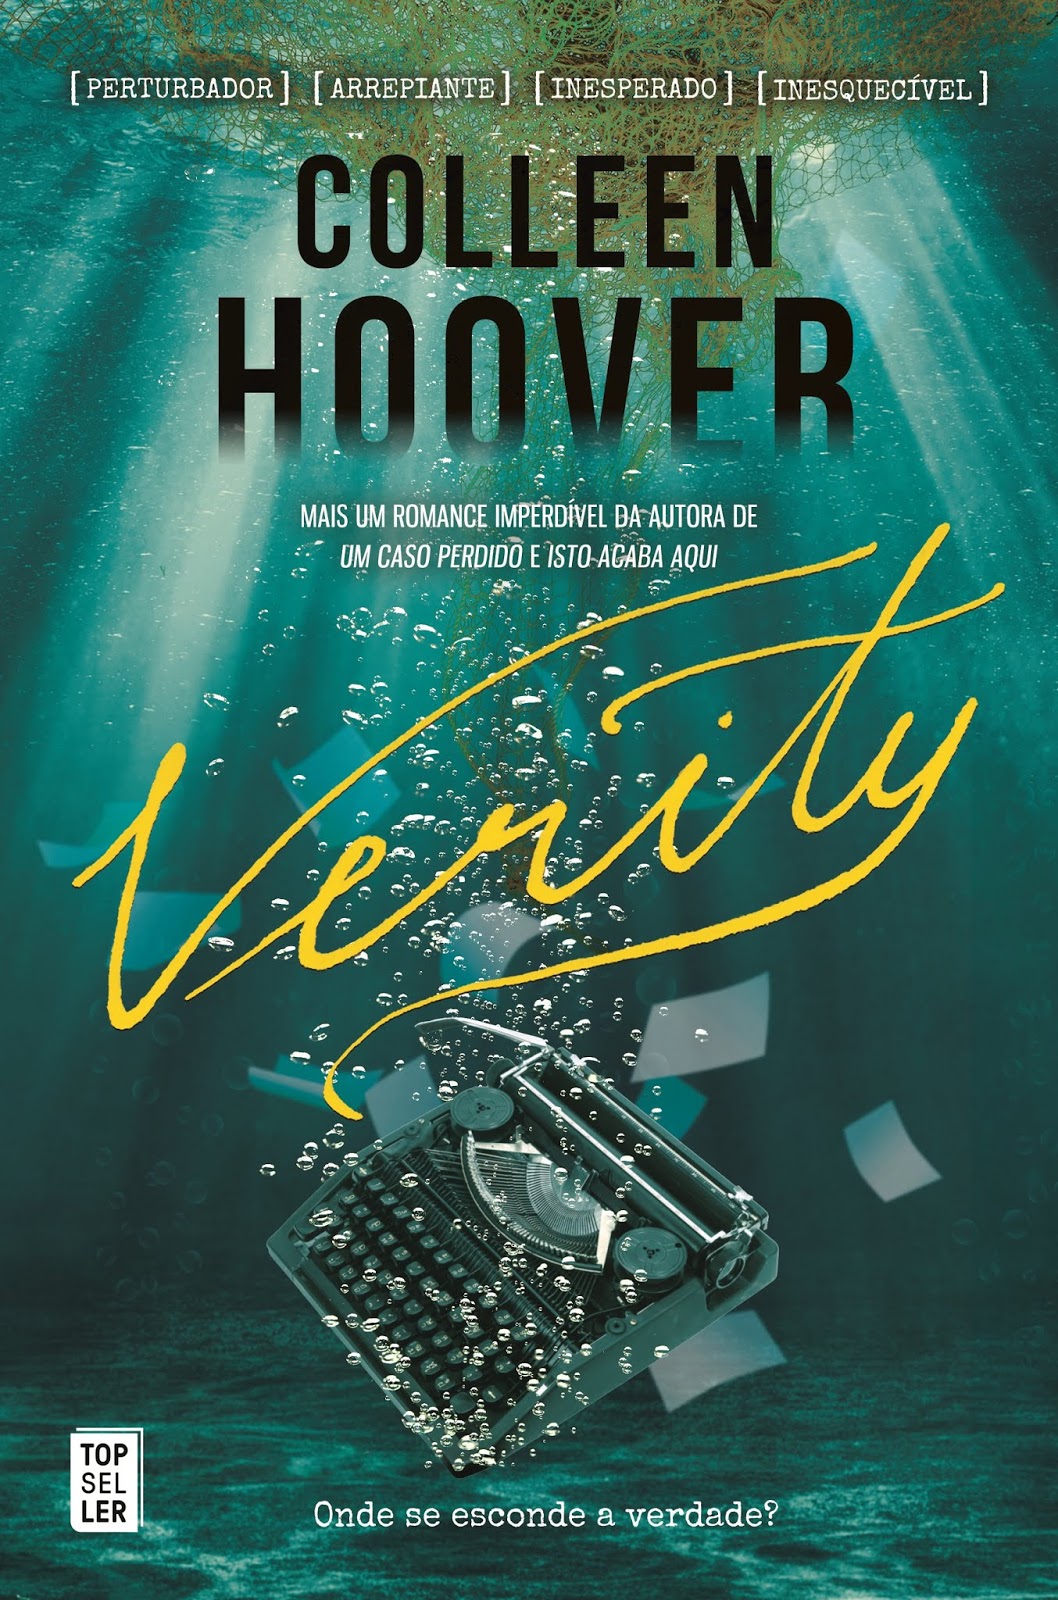 overview of the book verity